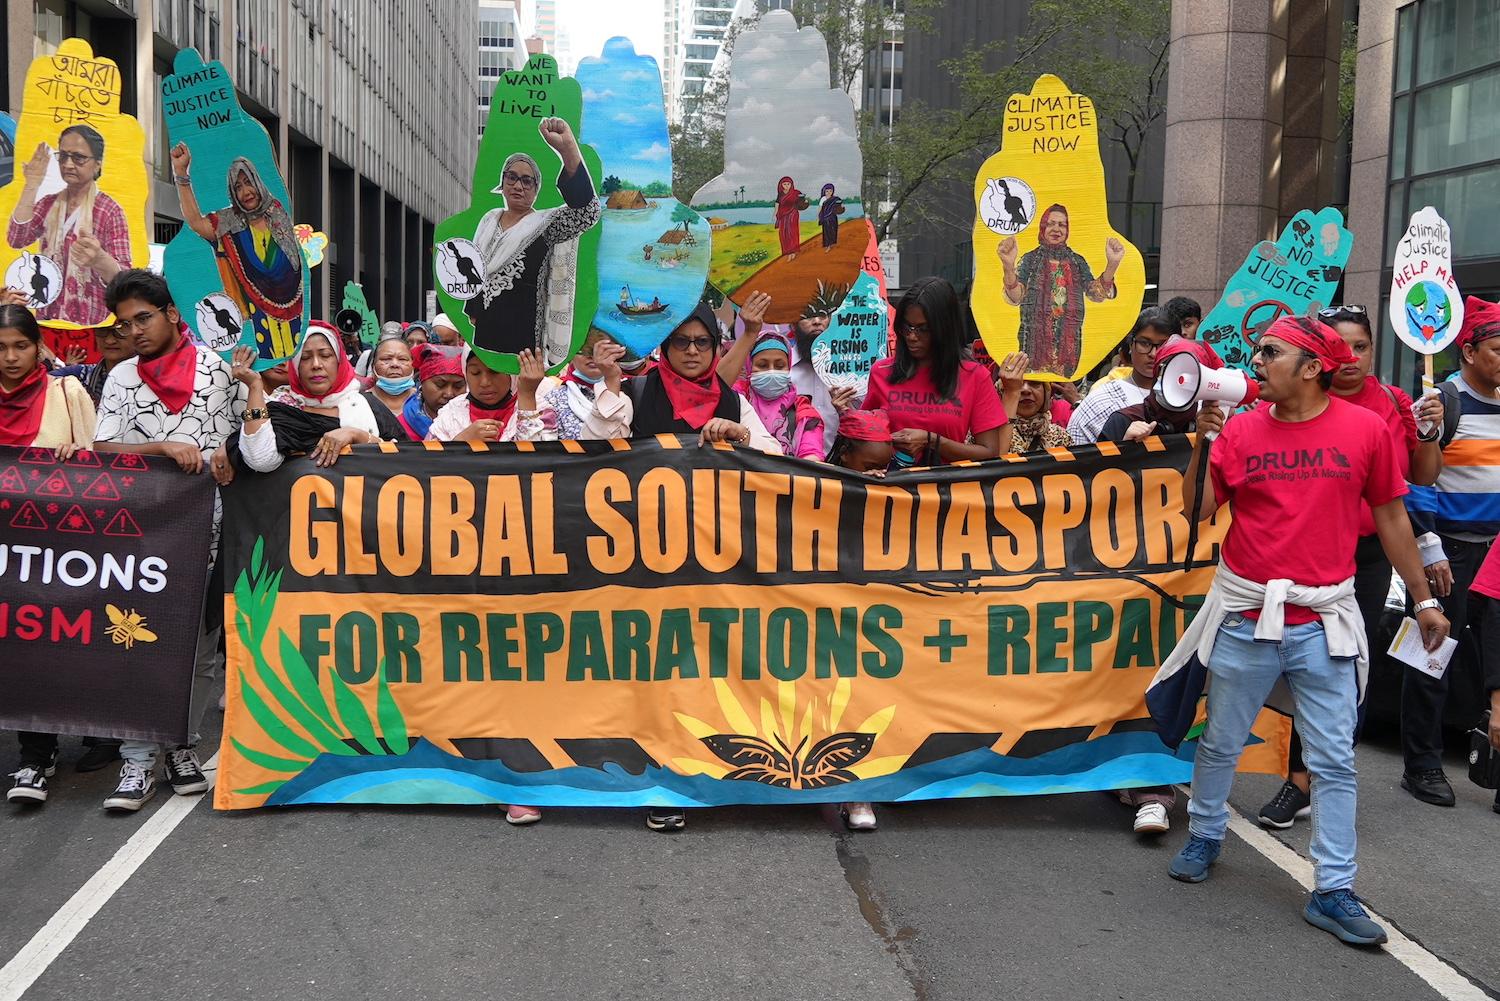 Activists hold a sign that reads "Global South Diaspora for Reparations + Repair" at a climate march.